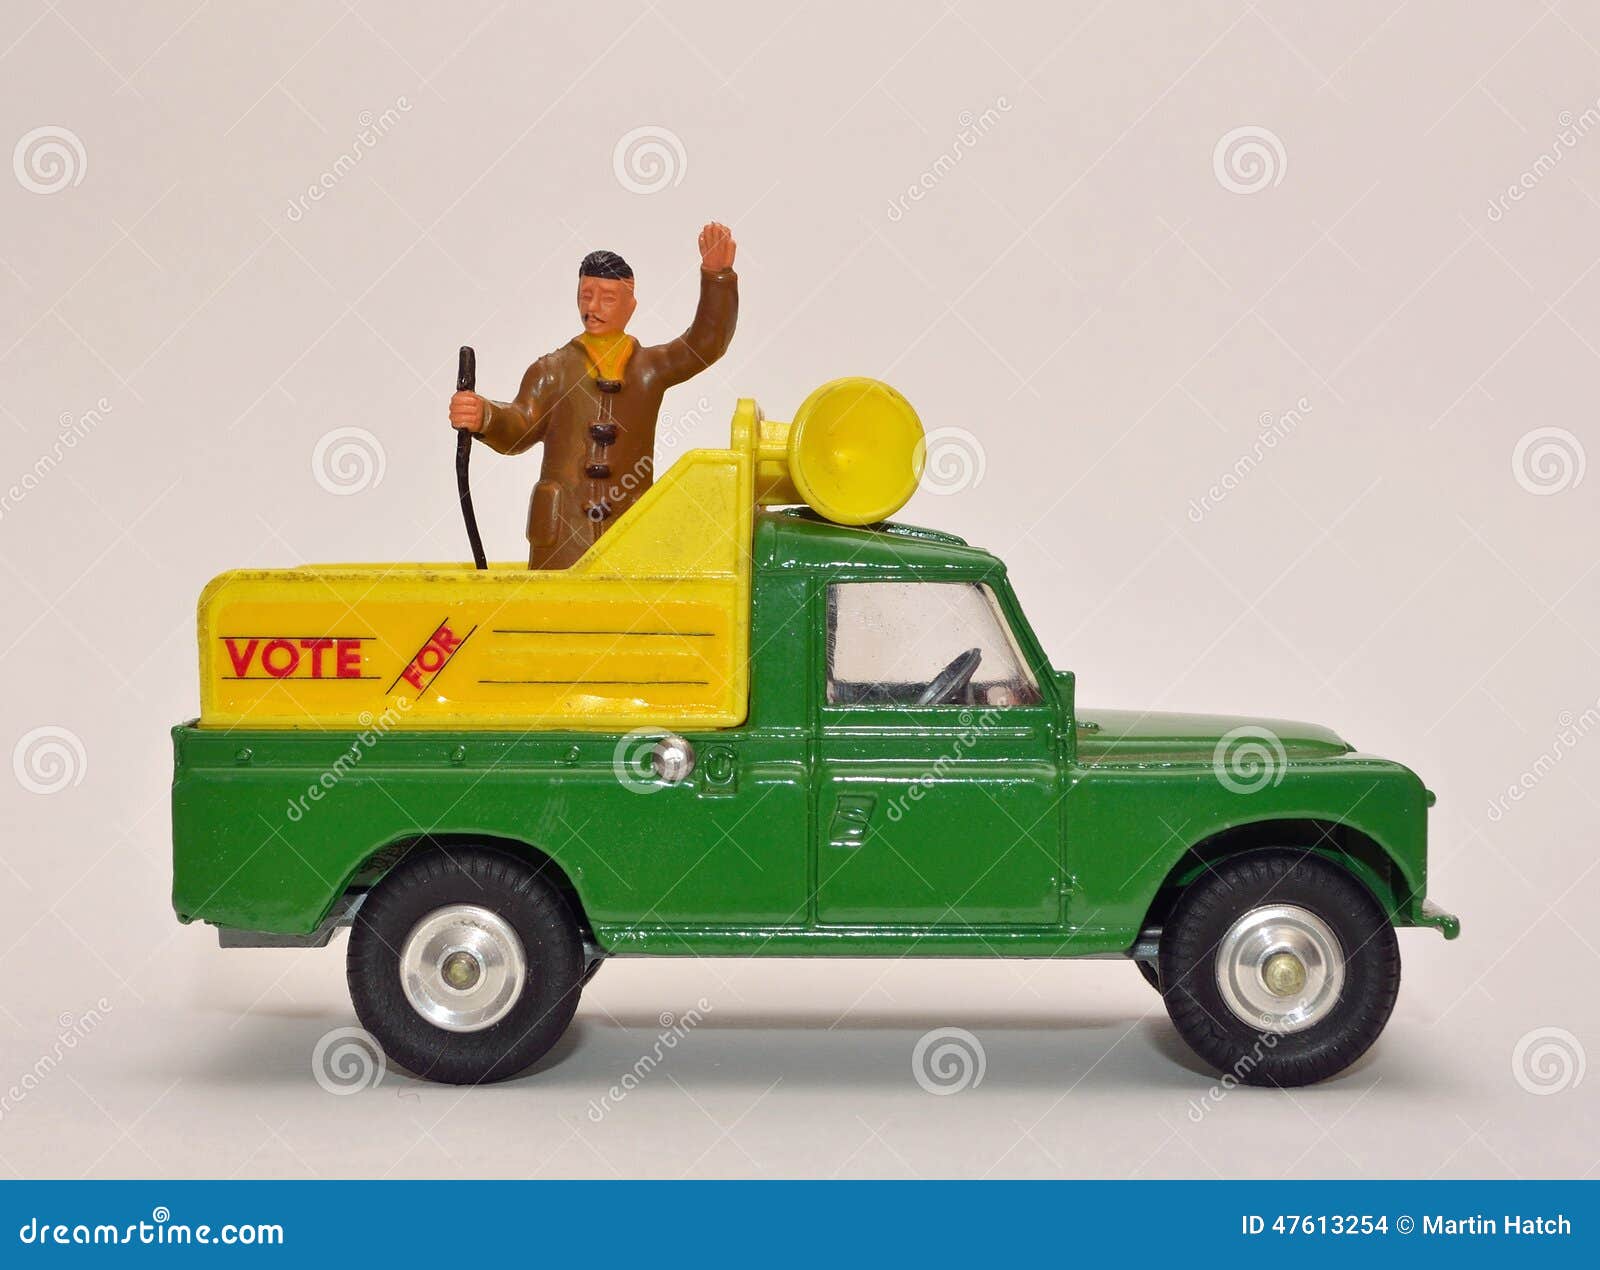 toy vote for landrover